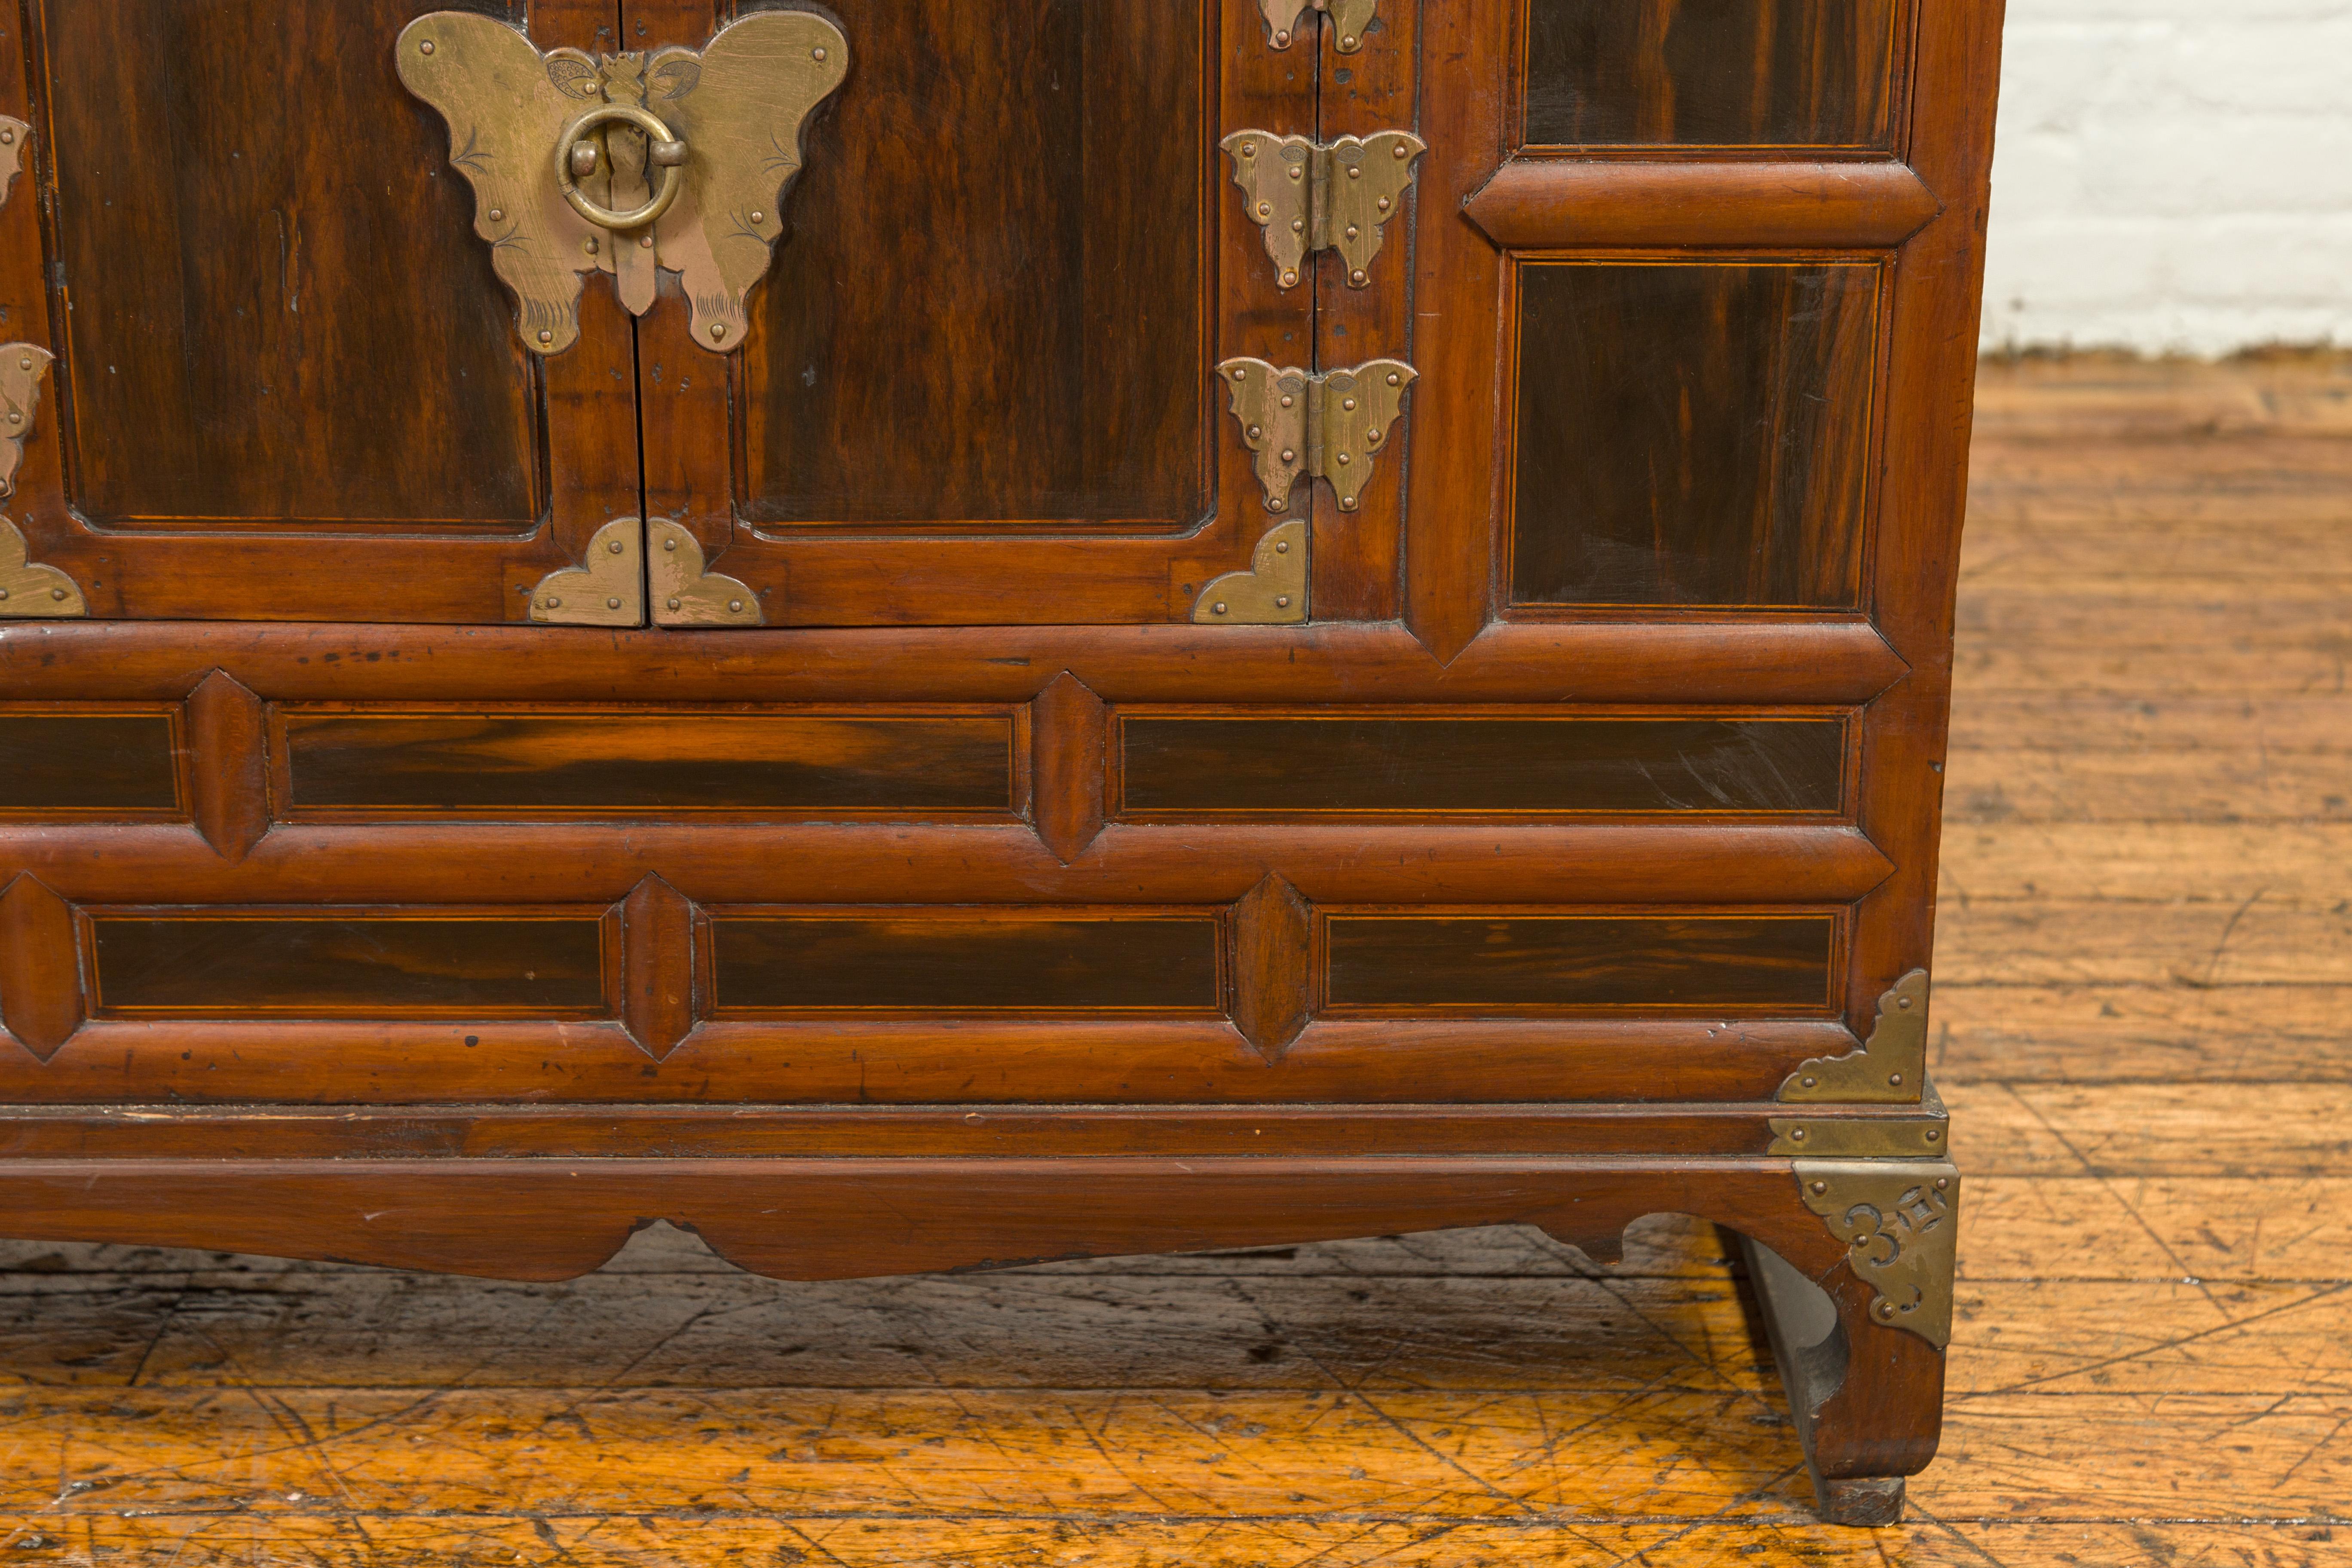 Korean 19th Century Wooden Cabinet with Drawers, Doors and Butterfly Hardware 4